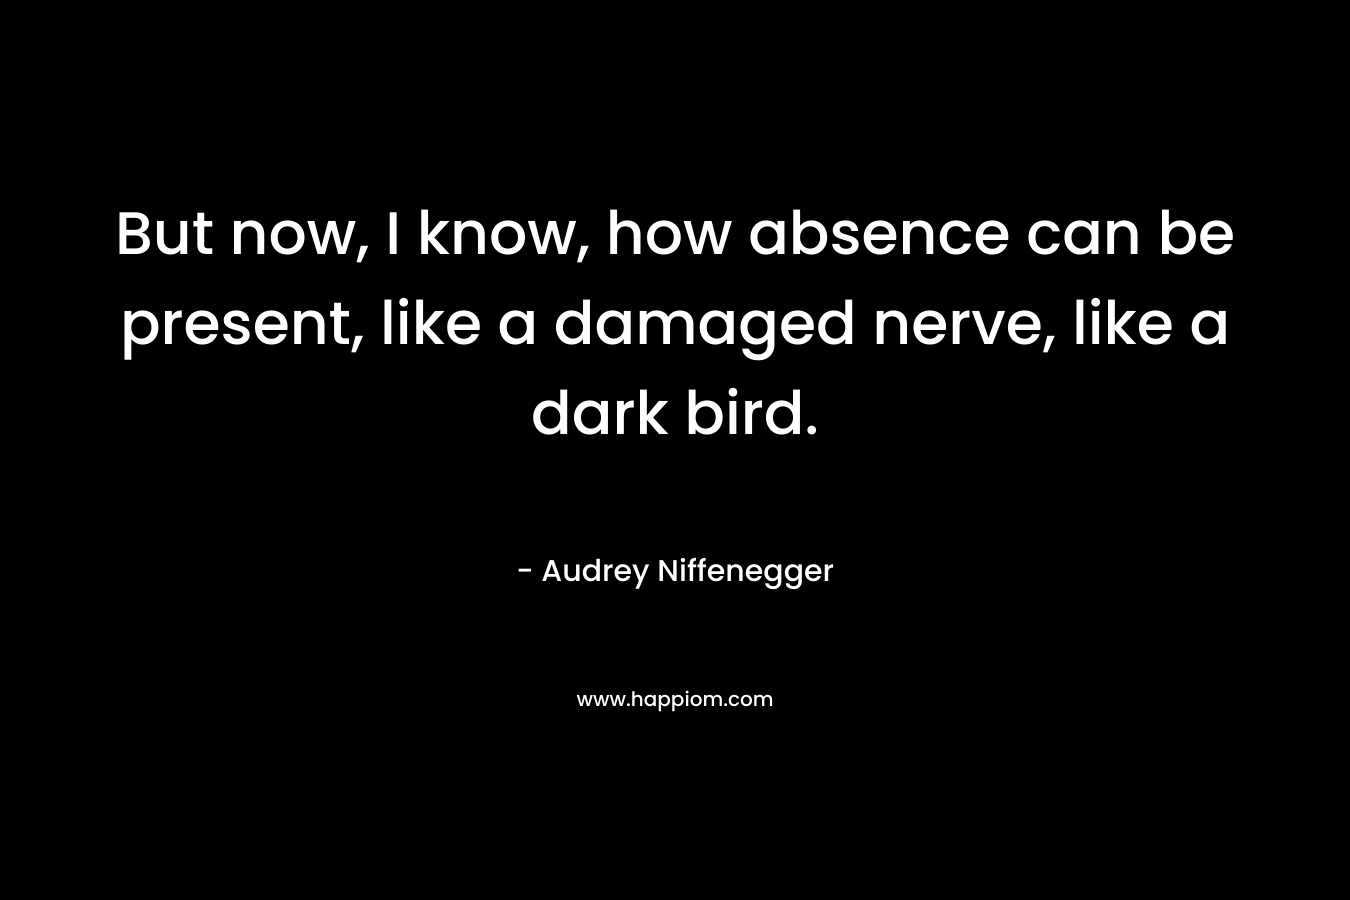 But now, I know, how absence can be present, like a damaged nerve, like a dark bird. – Audrey Niffenegger